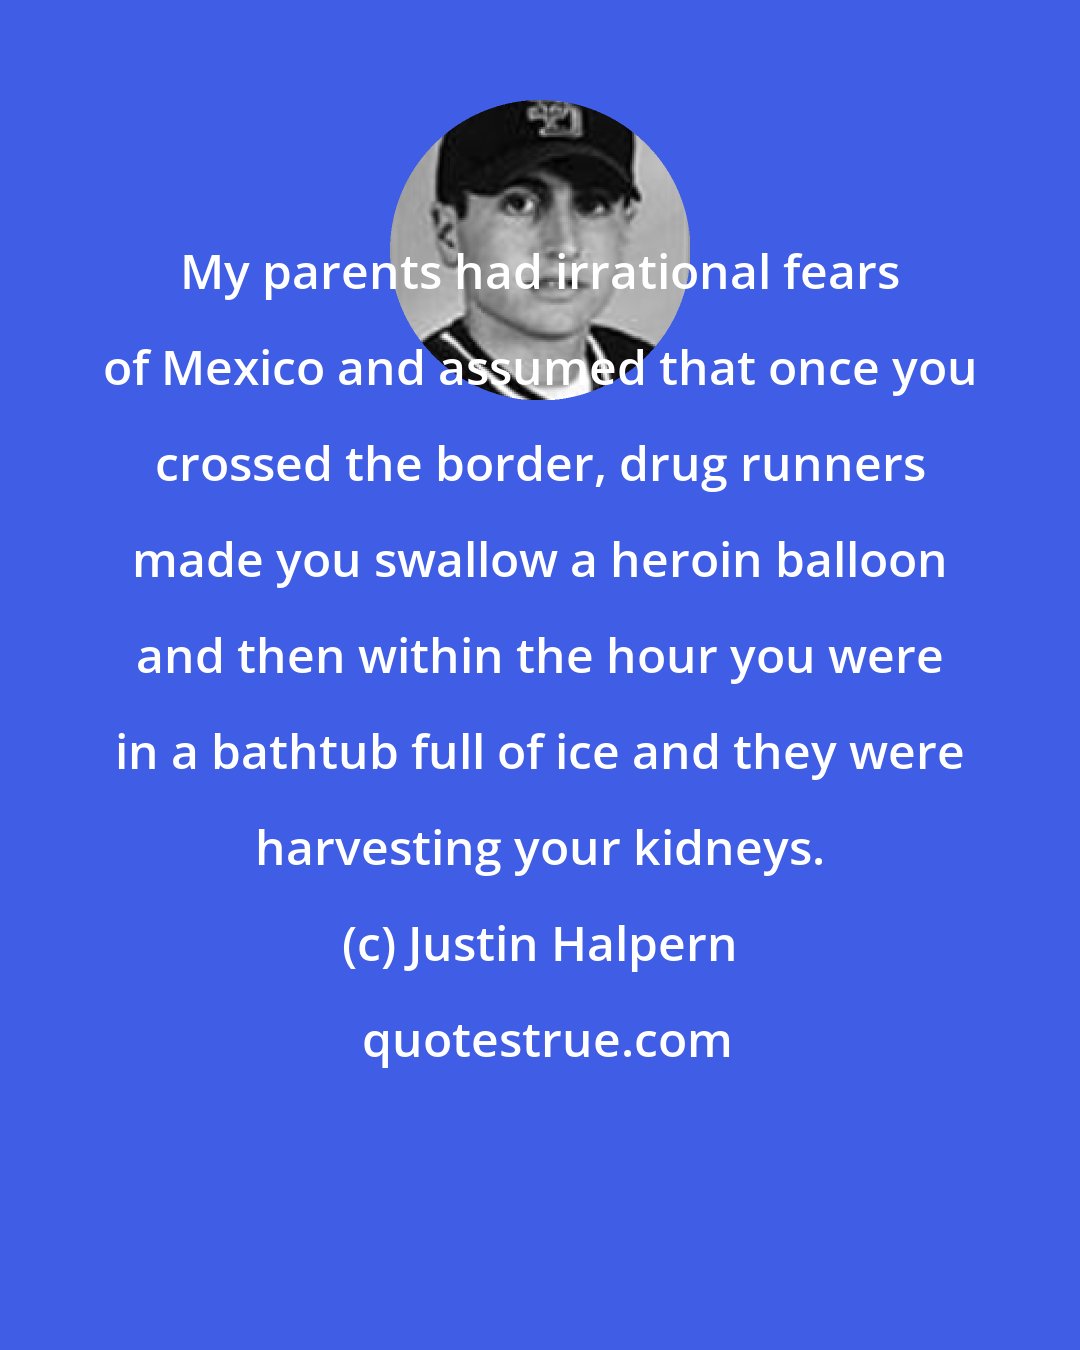 Justin Halpern: My parents had irrational fears of Mexico and assumed that once you crossed the border, drug runners made you swallow a heroin balloon and then within the hour you were in a bathtub full of ice and they were harvesting your kidneys.